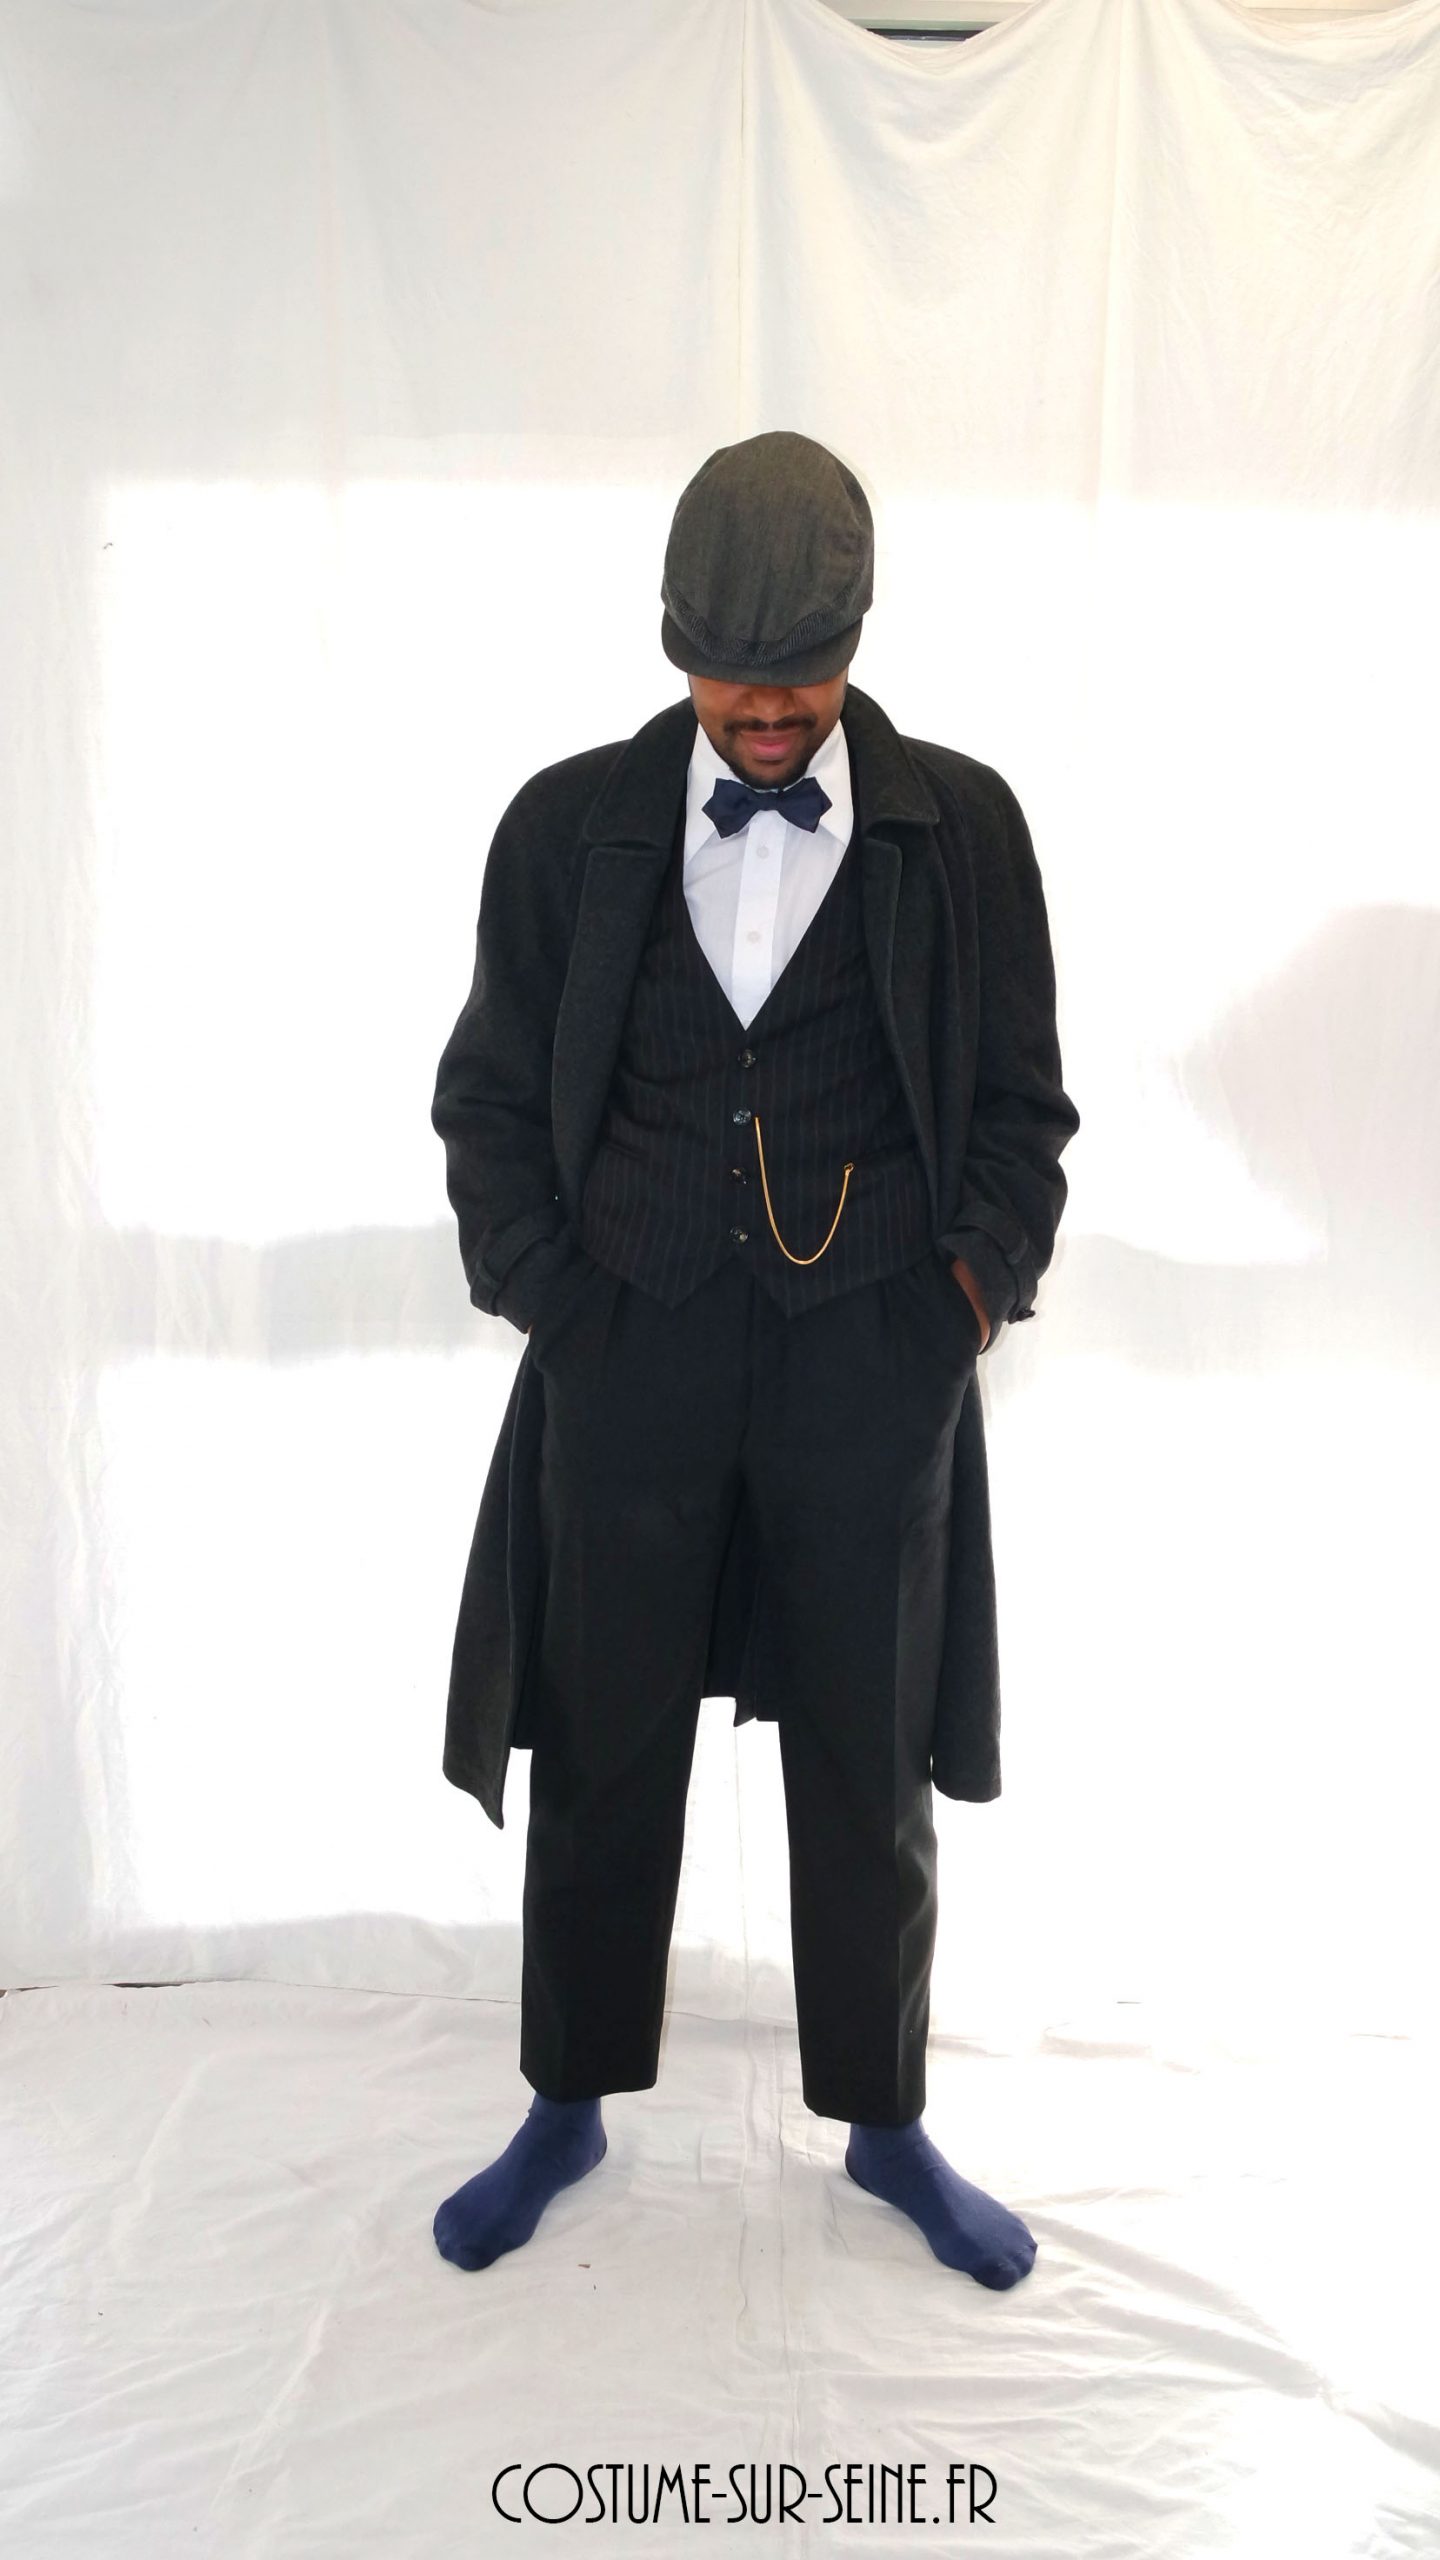 Costume mariage homme - Ce costume de style Peaky Blinders avec